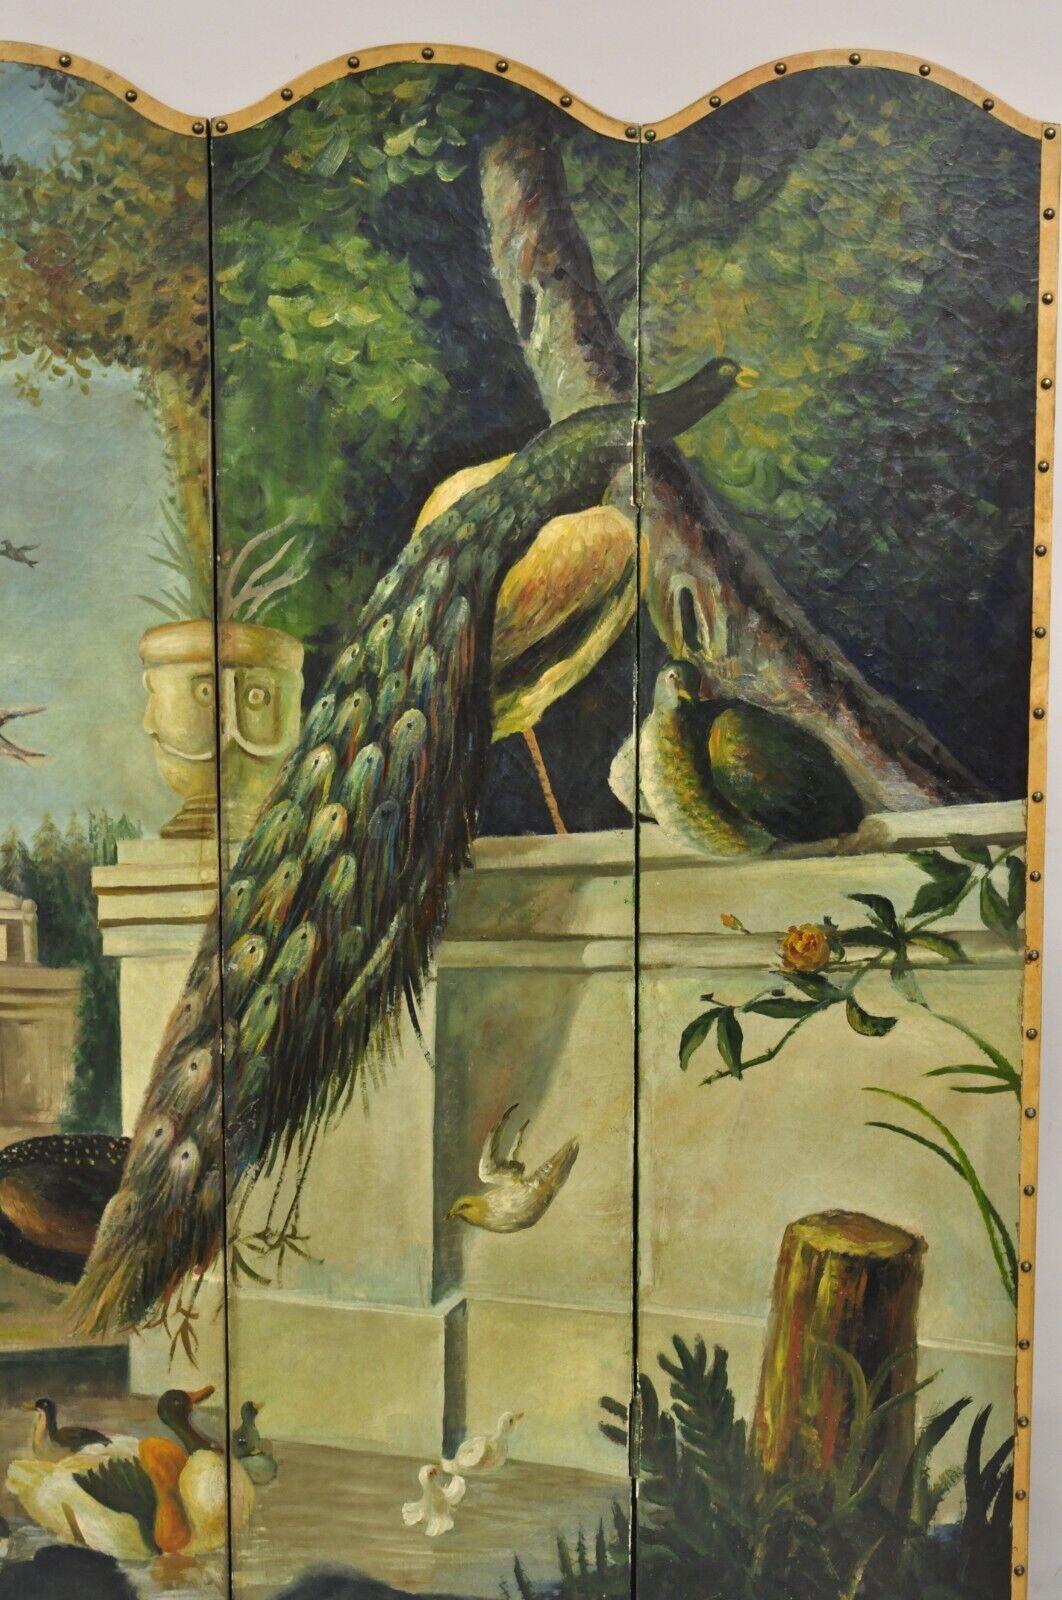 Gothic Venetian Hand Painted Oil on Canvas 4 Section Peacock Bird Screen Room Divider